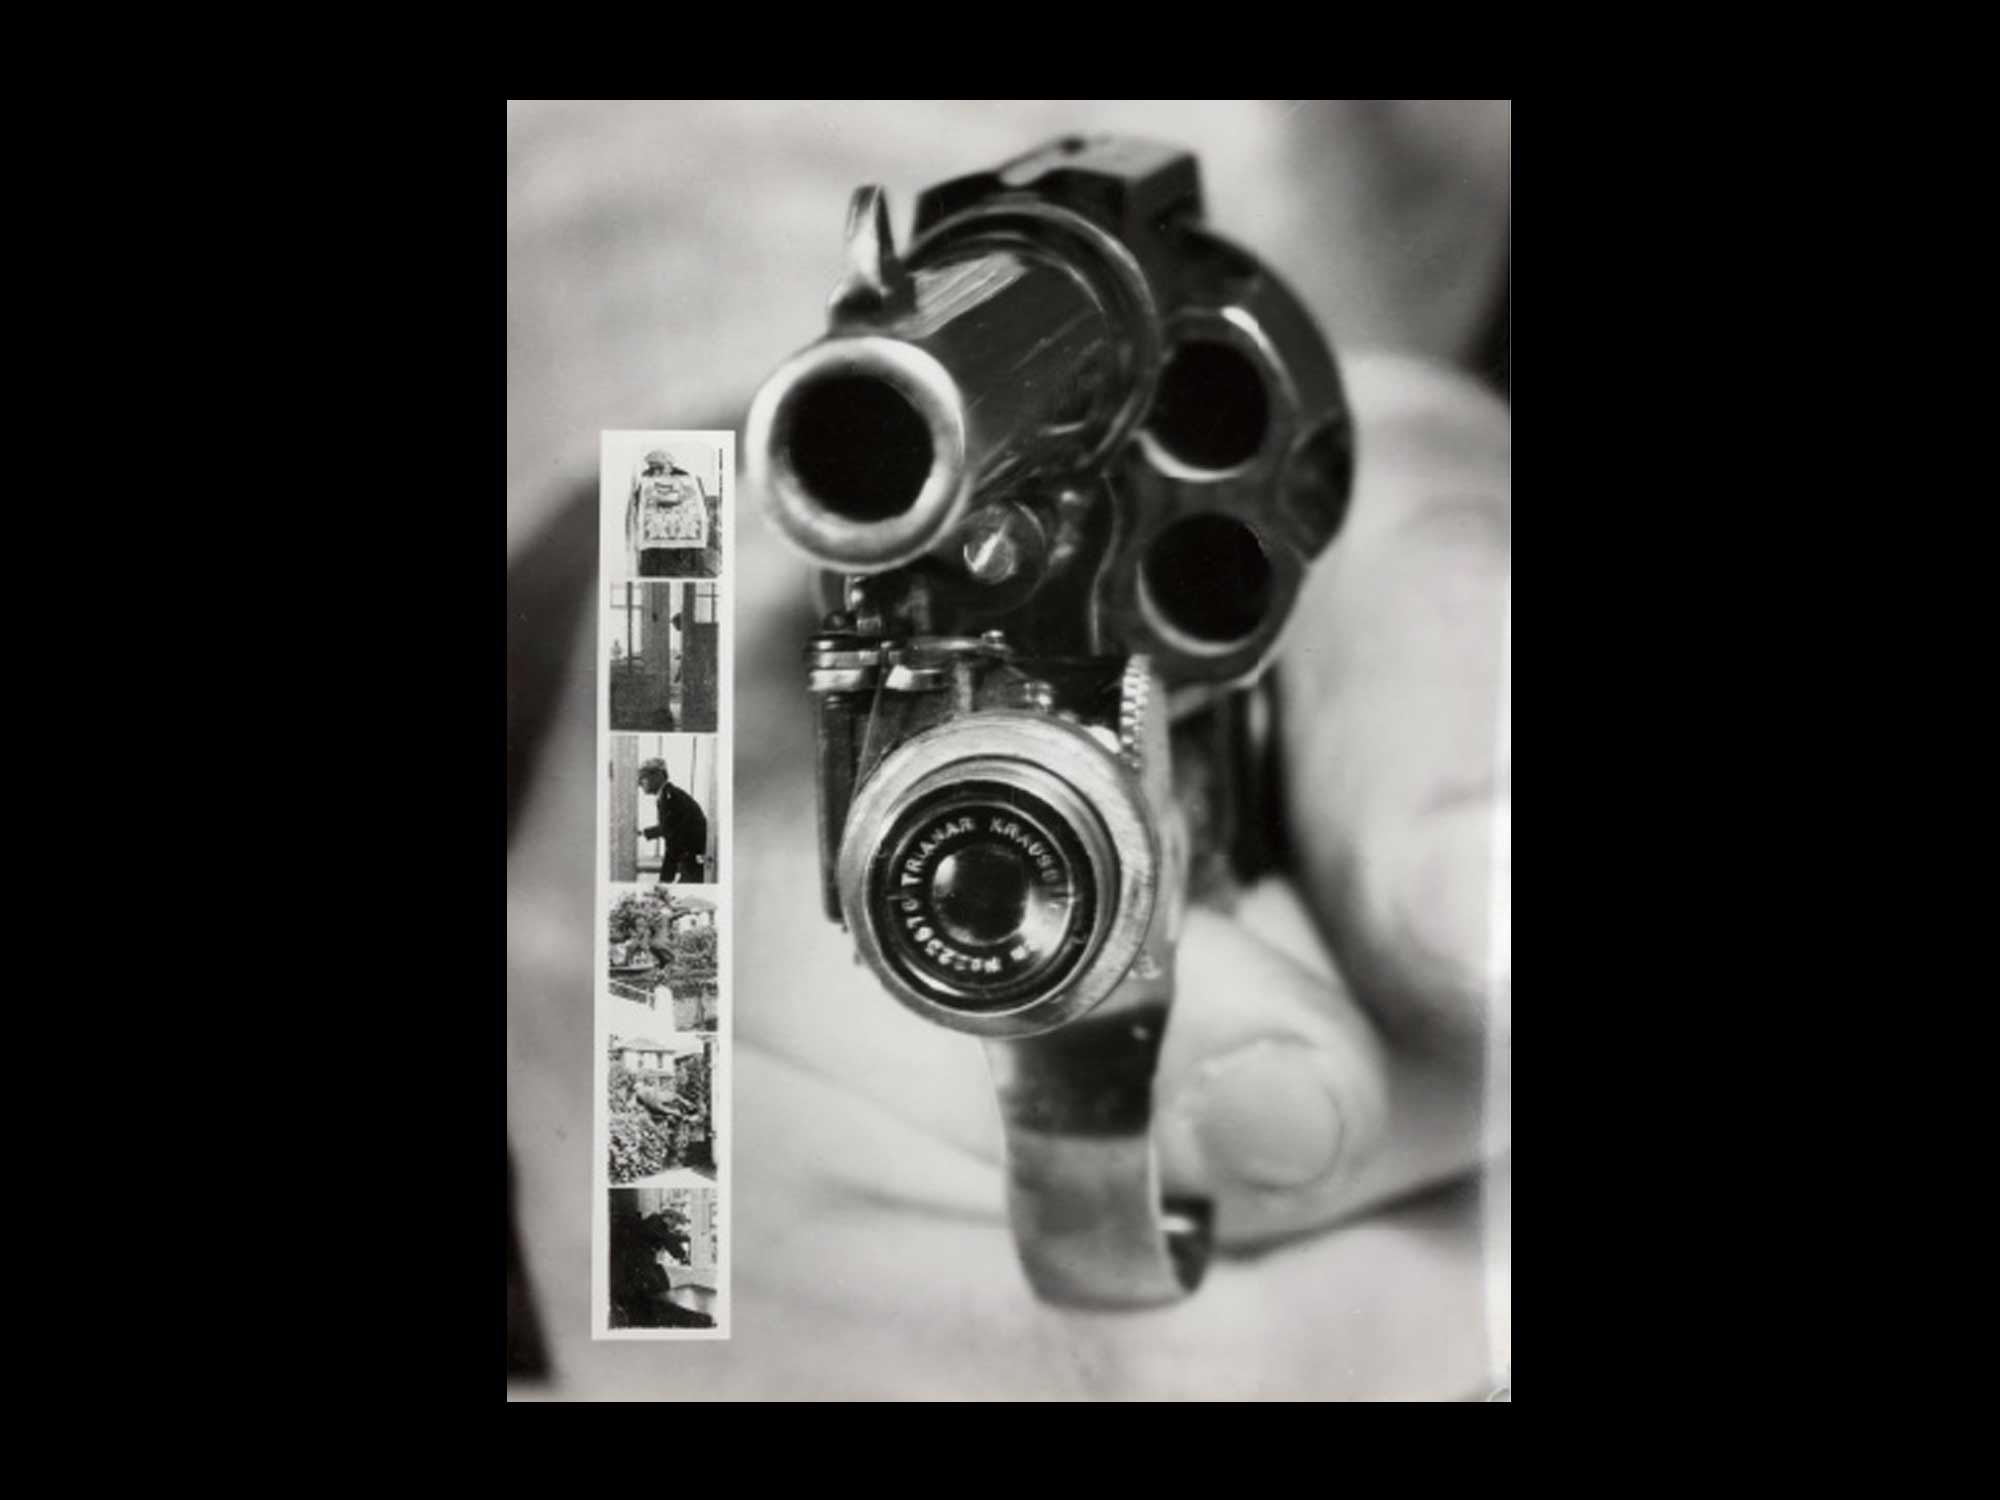 This Revolver Camera is One I Don't Want to "Say Cheese" For...